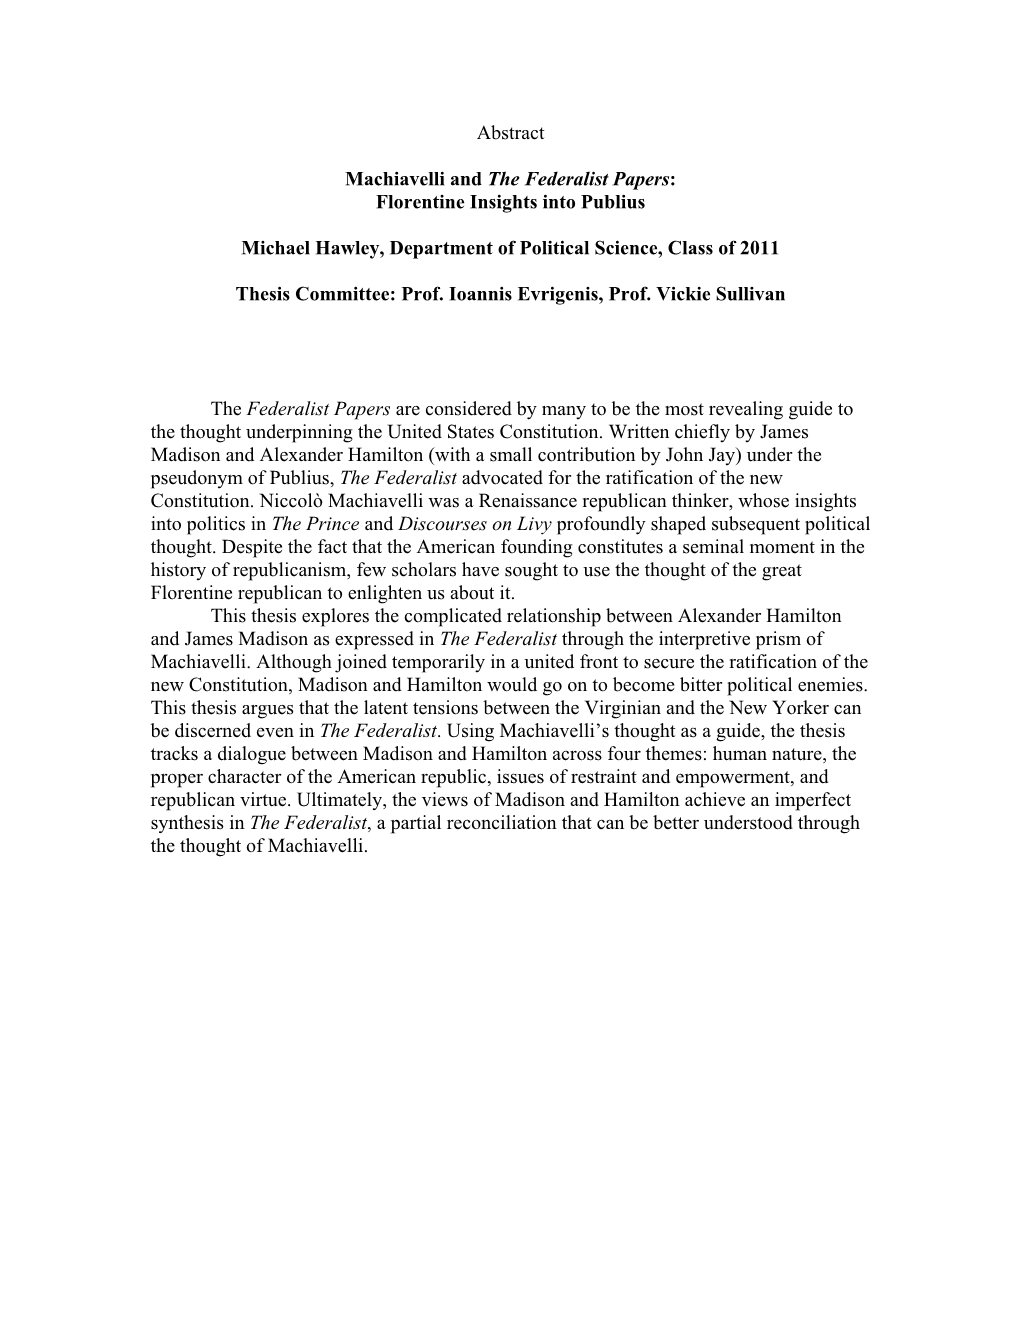 Abstract Machiavelli and the Federalist Papers: Florentine Insights Into Publius Michael Hawley, Department of Political Science